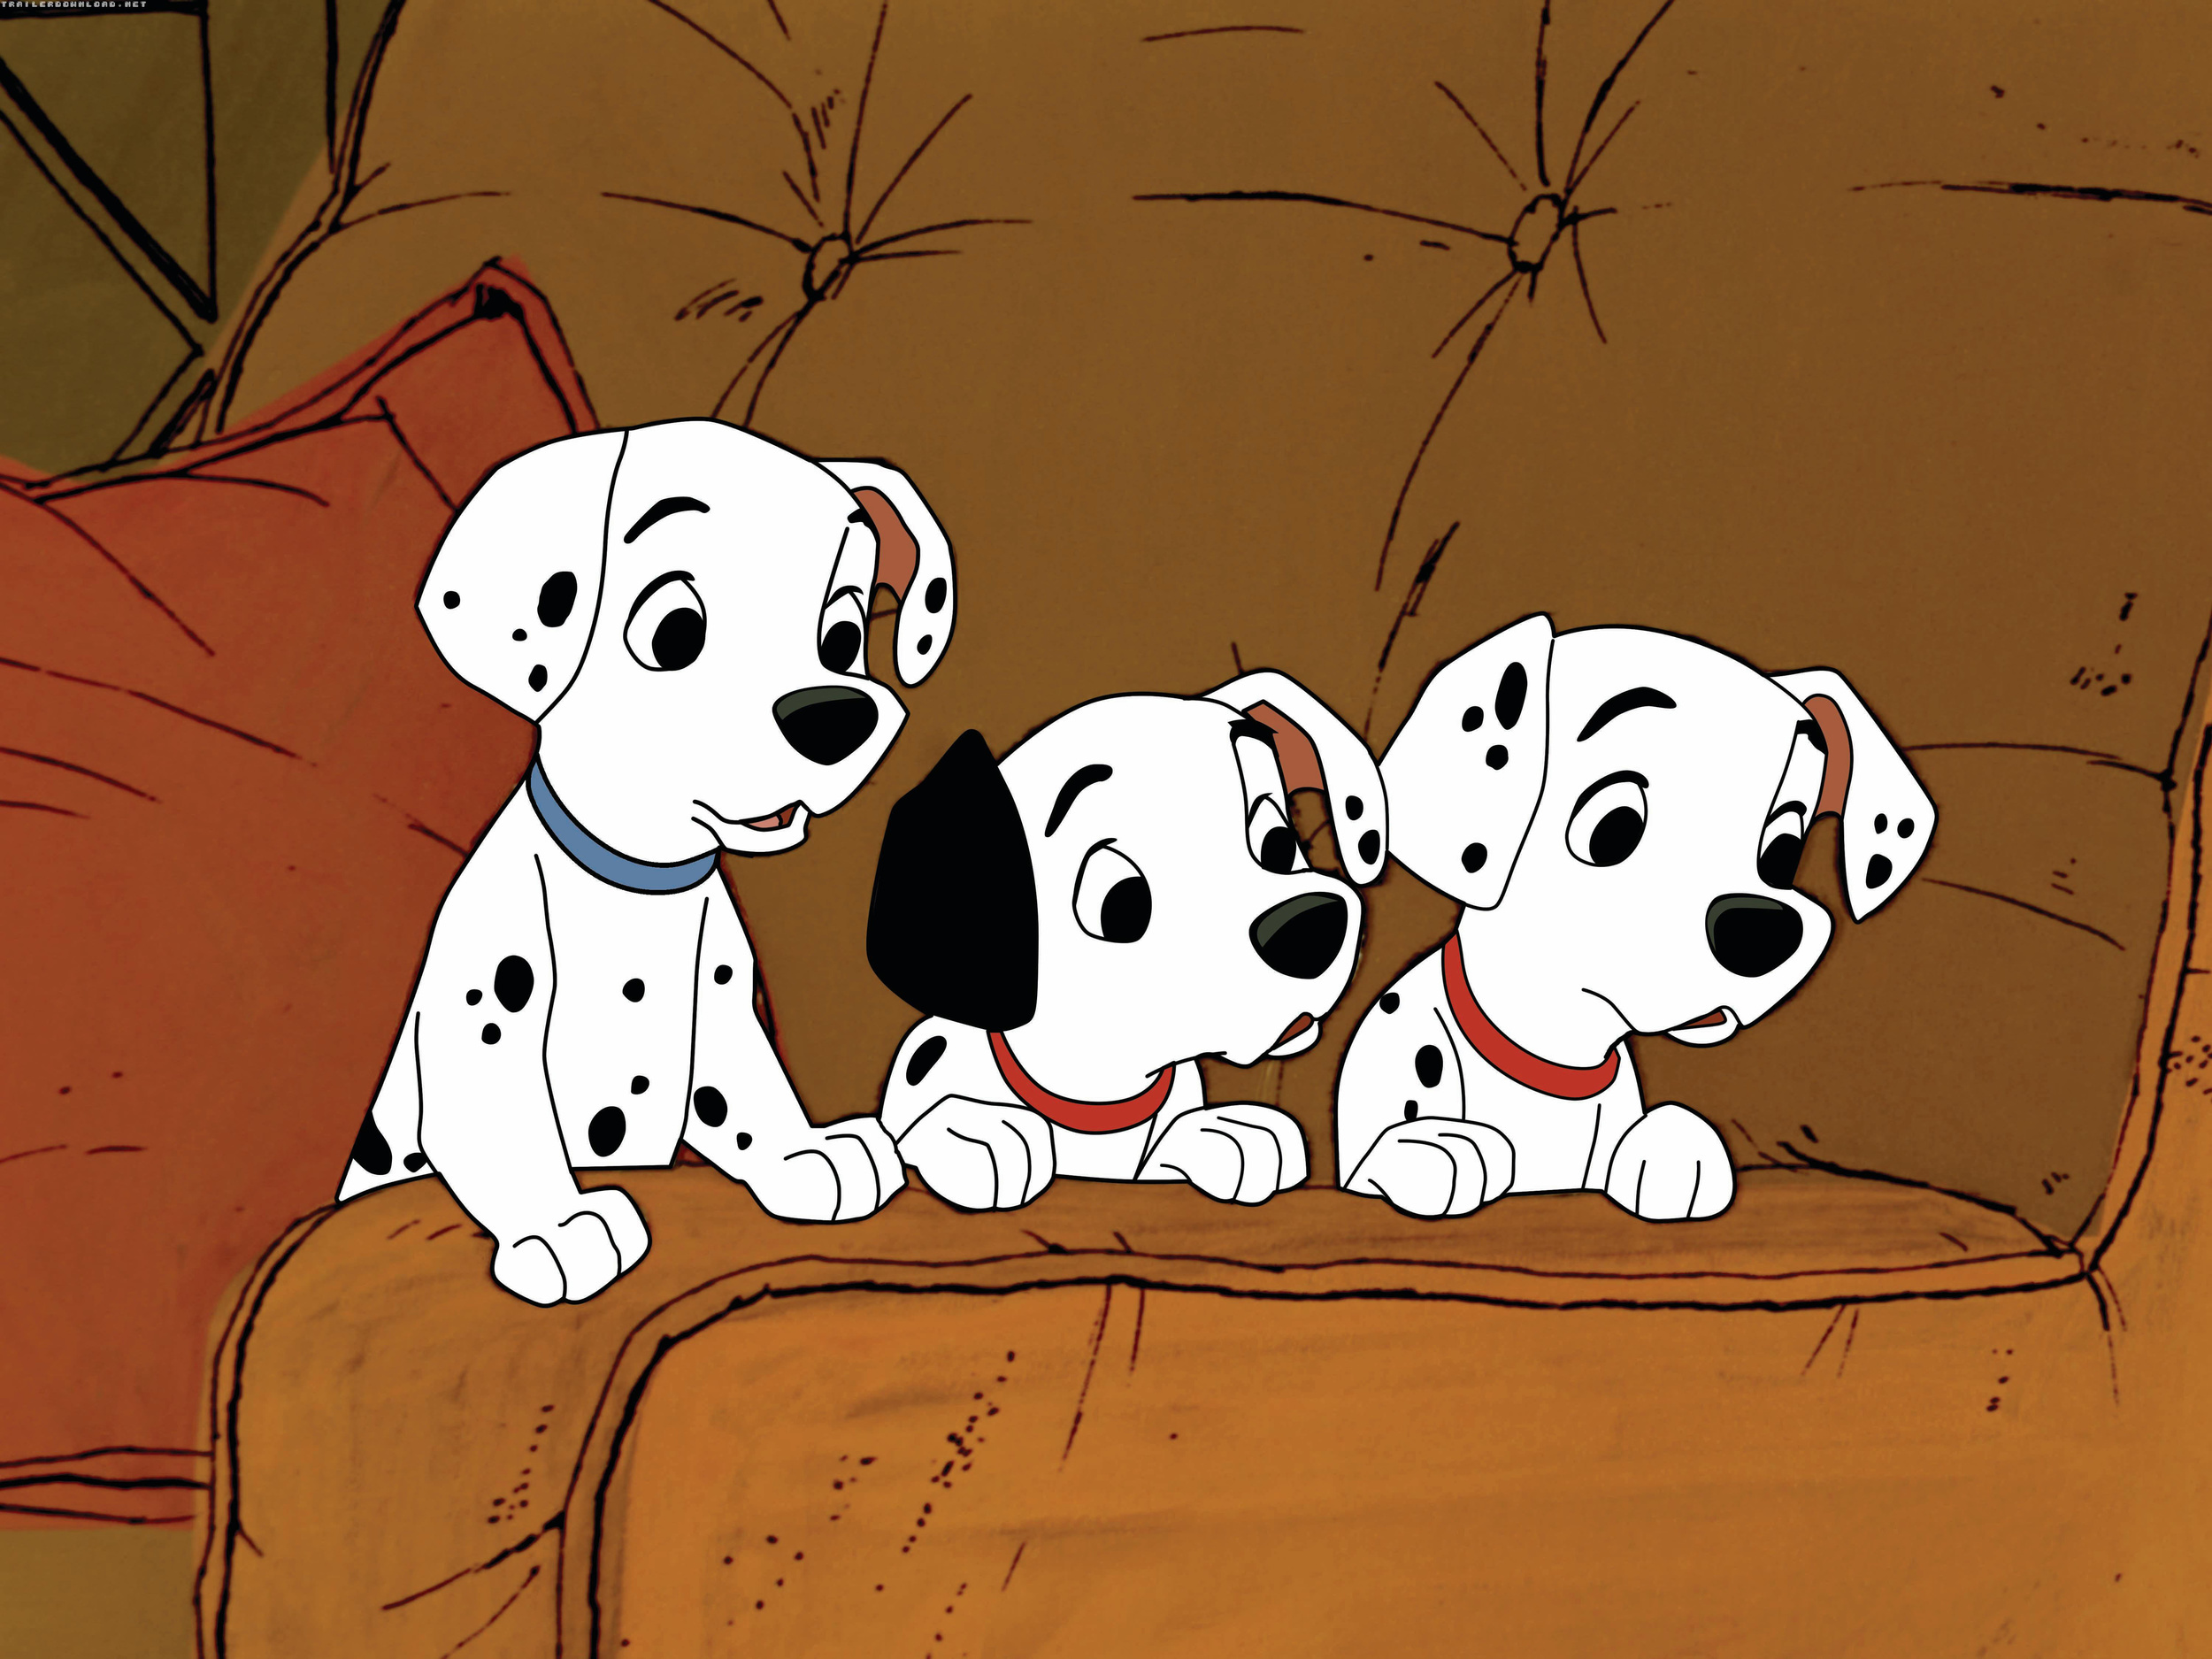 <p>Animated films can be set in London, too! Perhaps the most famous of the bunch is <em>101 Dalmatians</em>. It’s about two Londoners and their London dogs, all 101 of them, and of course Cruella de Vil. Yes, Cruella is a London gal.</p><p>You may also like: <a href='https://www.yardbarker.com/entertainment/articles/actors_who_won_oscars_for_war_movies_011924/s1__39674030'>Actors who won Oscars for war movies</a></p>